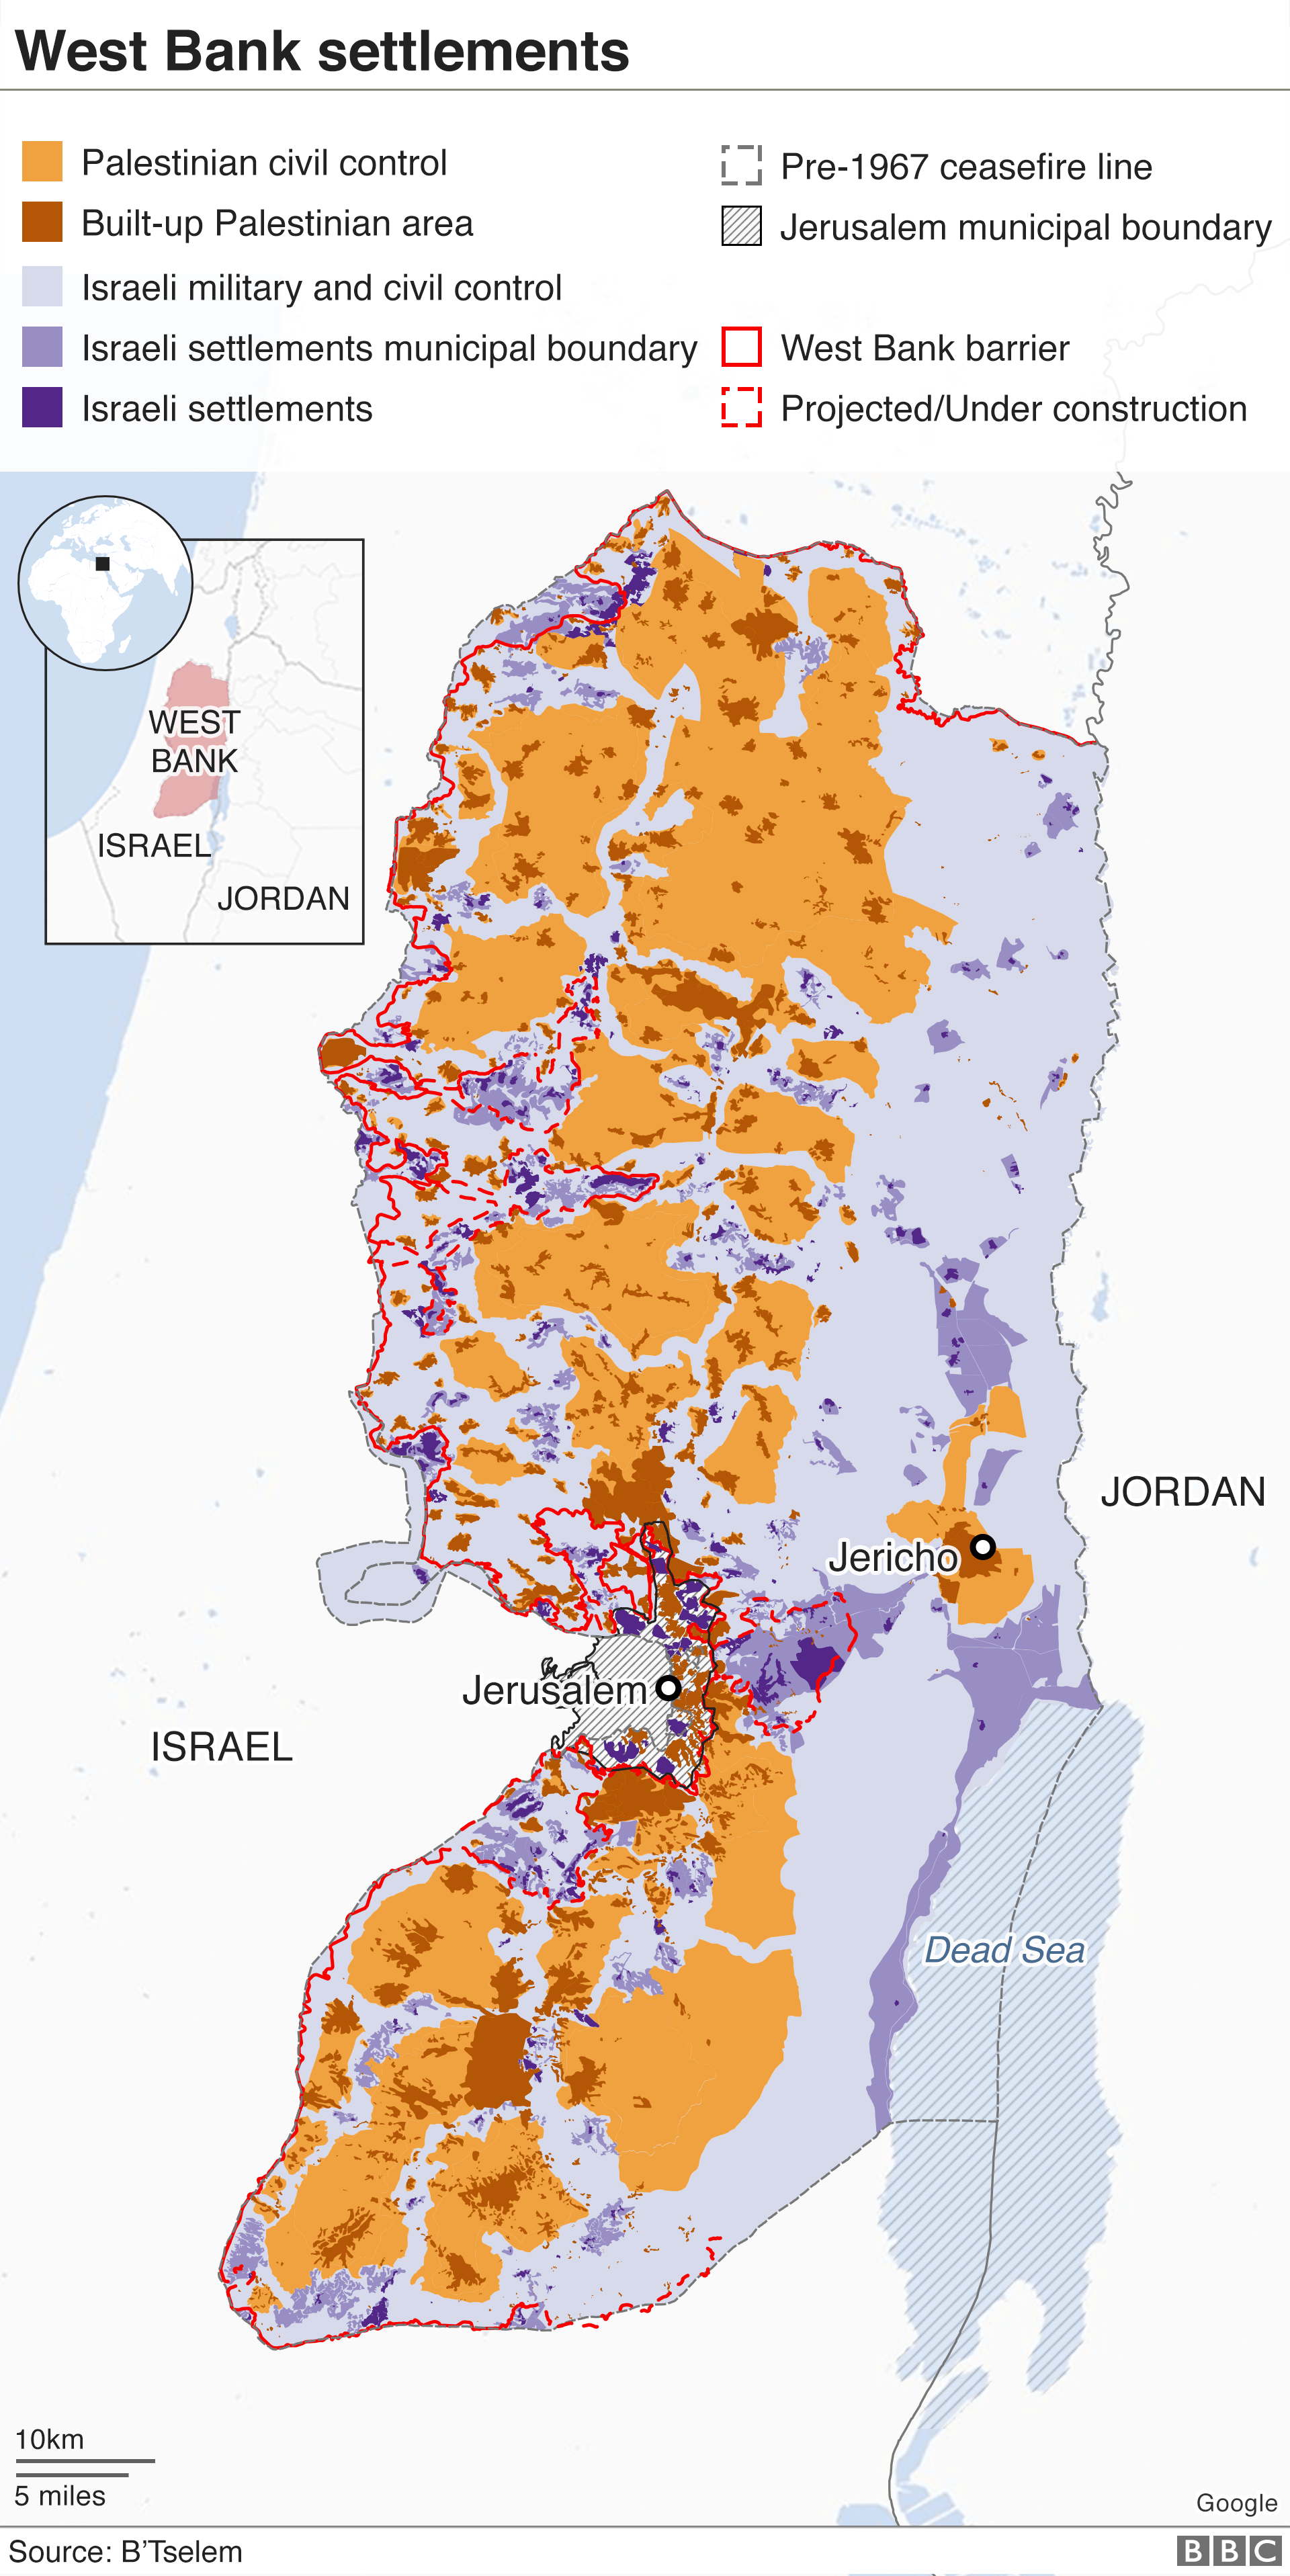 Map of the West Bank settlements